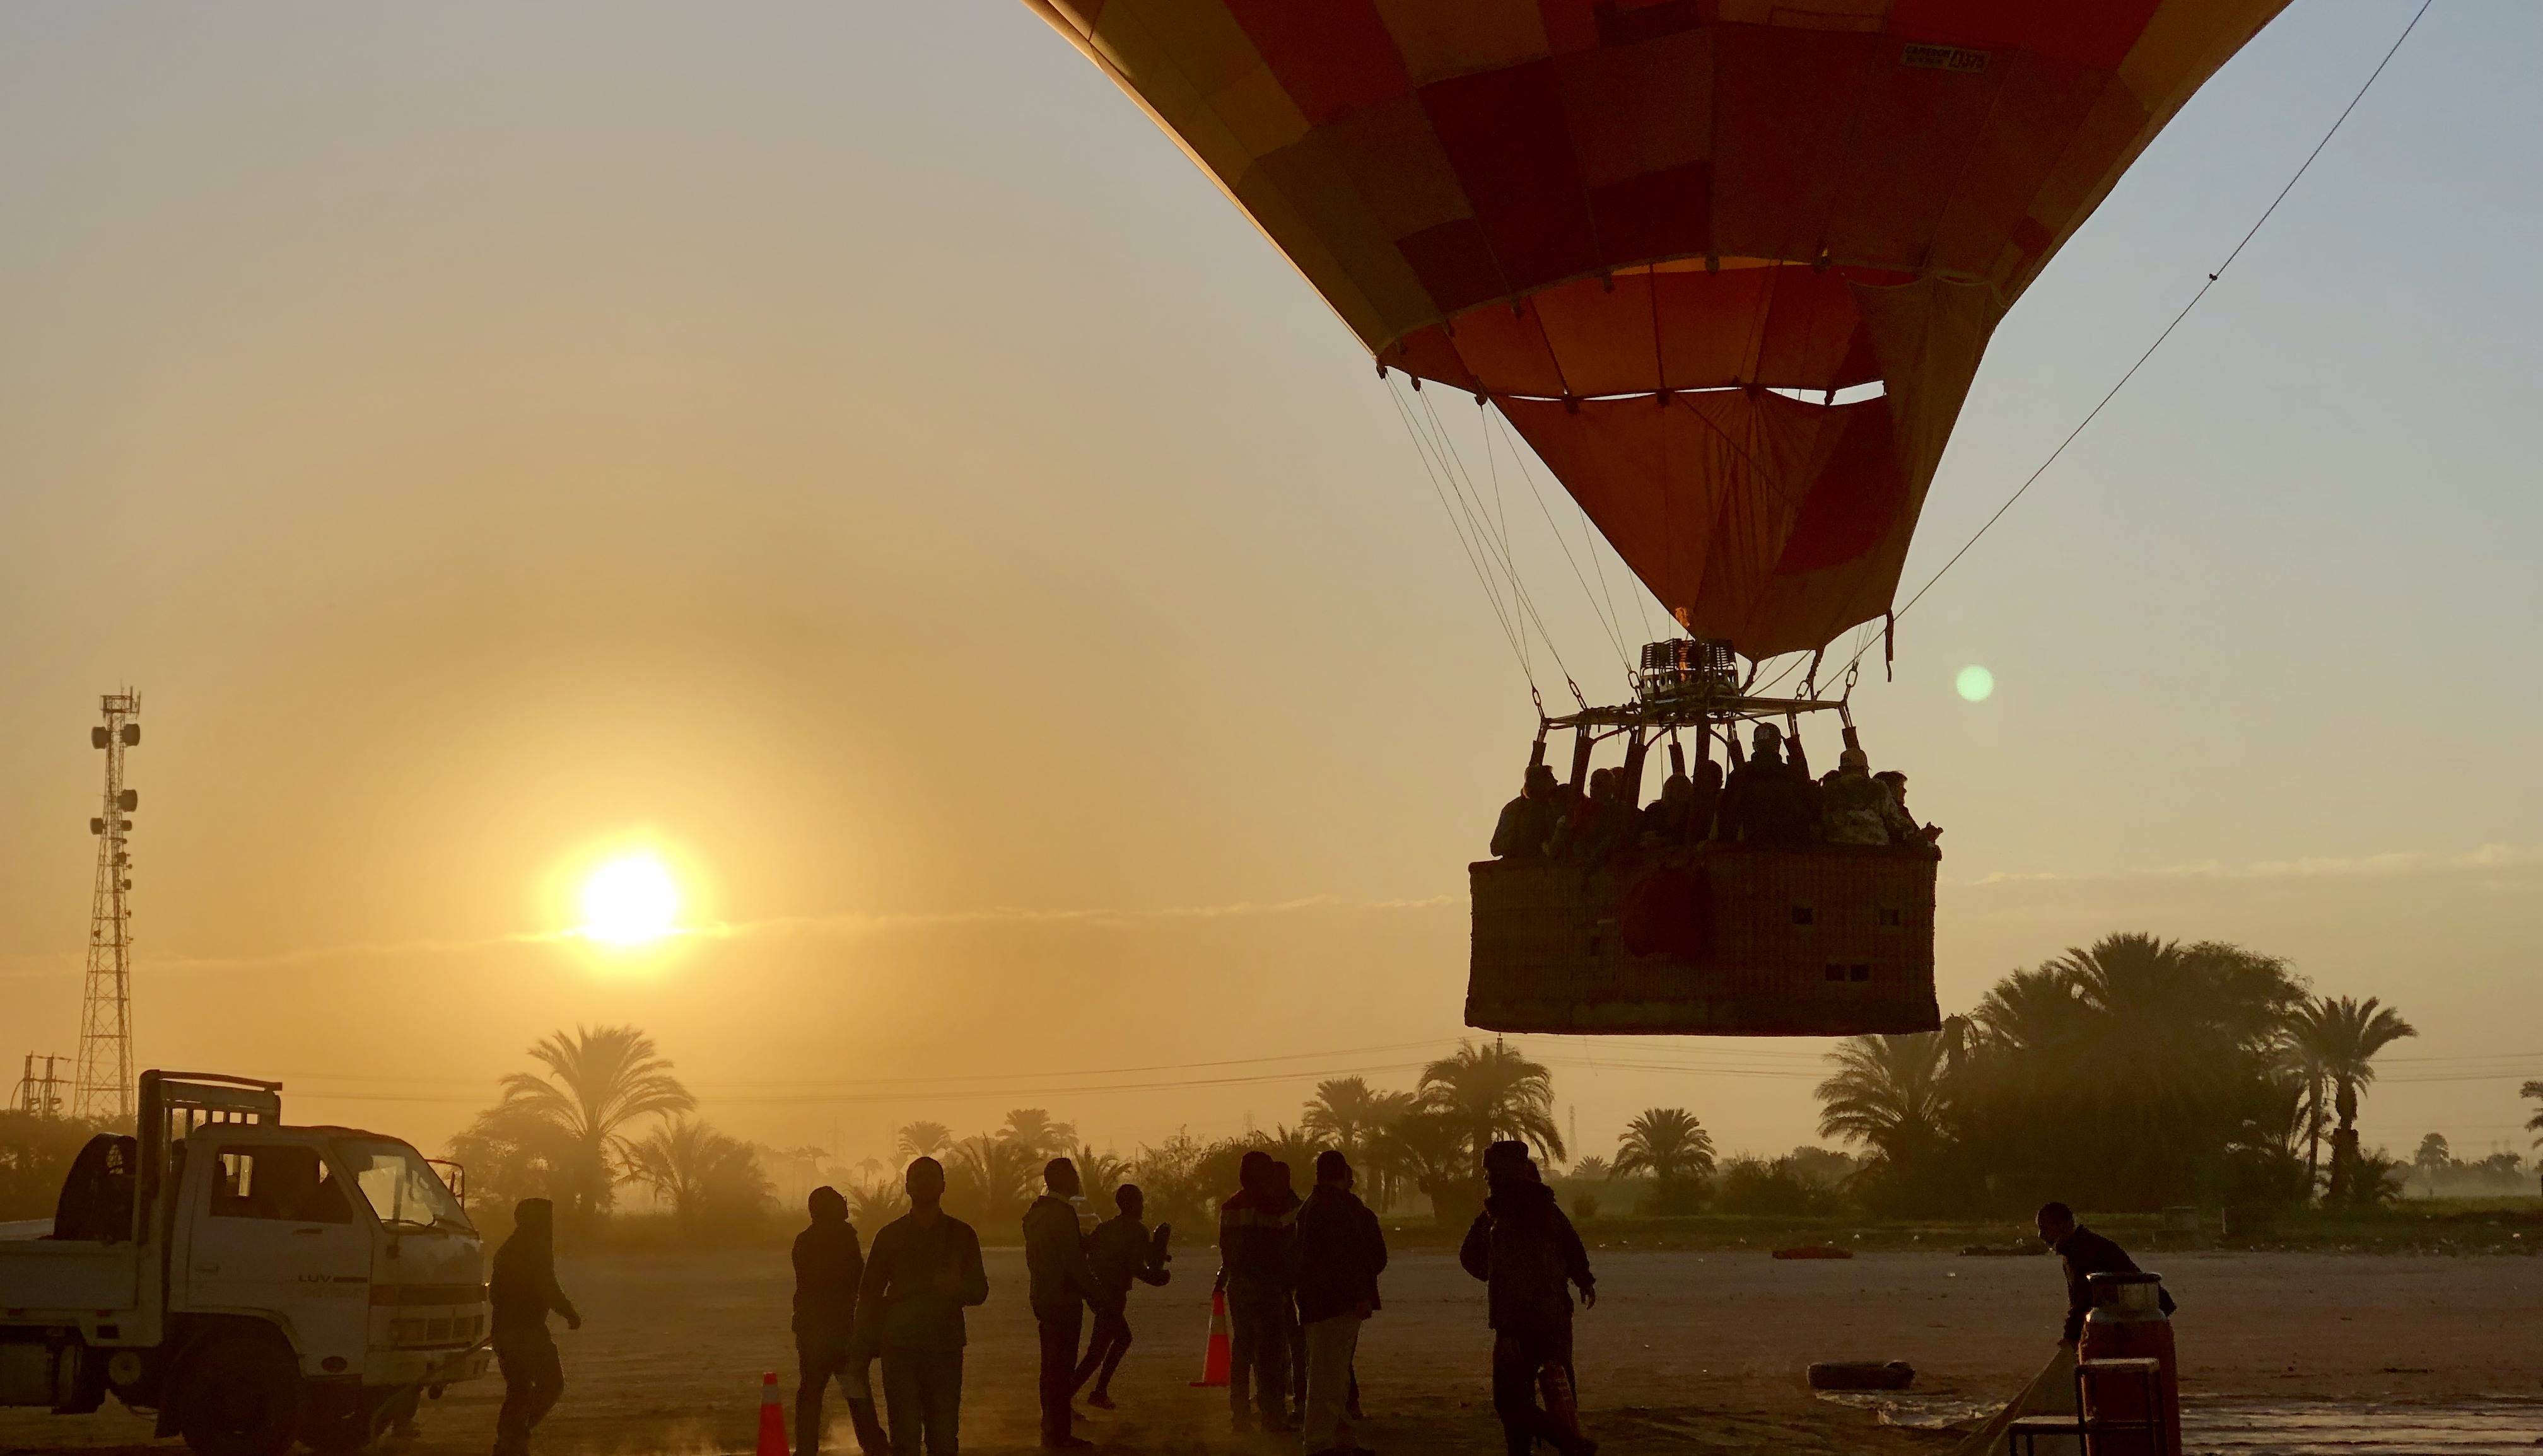 People preparing a hot air balloon for takeoff in front of a sunrise and palm trees